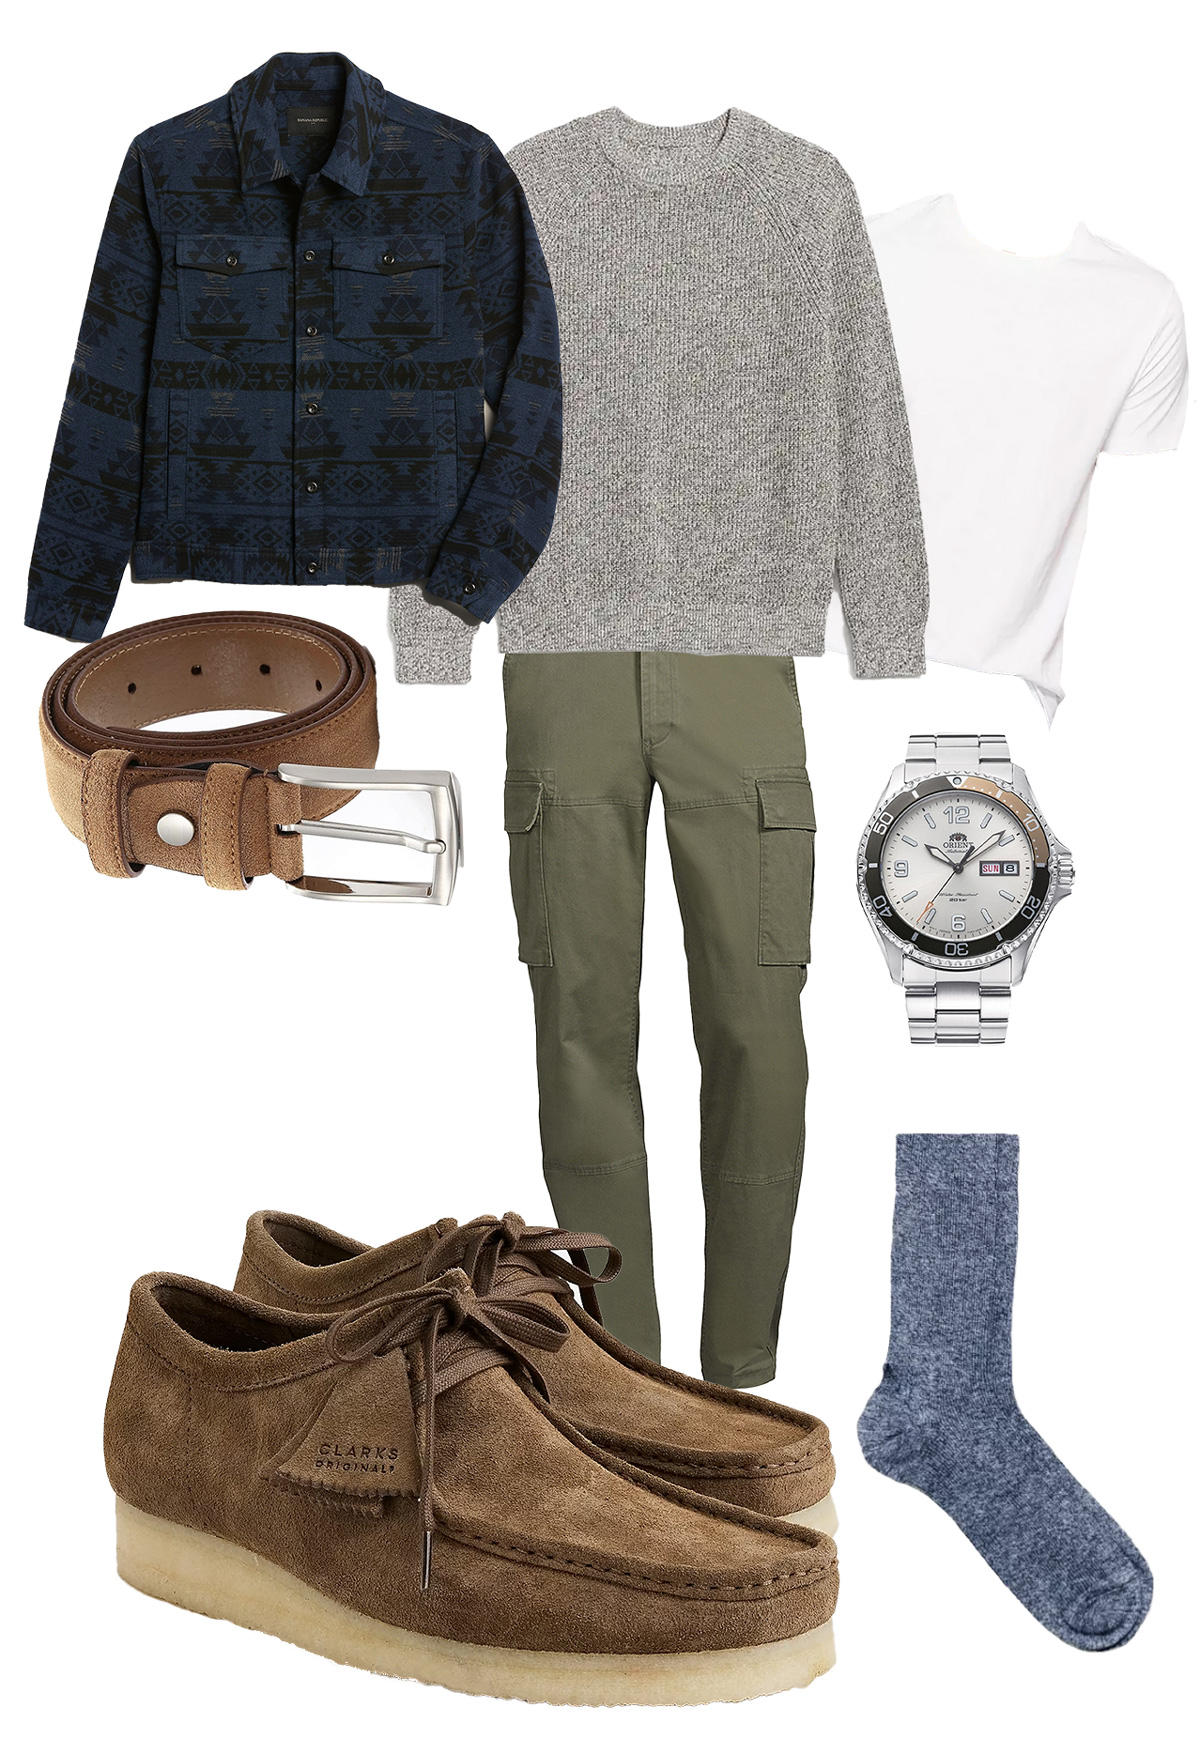 Men's fall outfit featuring a blue geometric-patterned jacket, light gray sweater, white t-shirt, olive-green cargo trousers, tan belt, brown suede shoes, silver watch, and dark blue socks